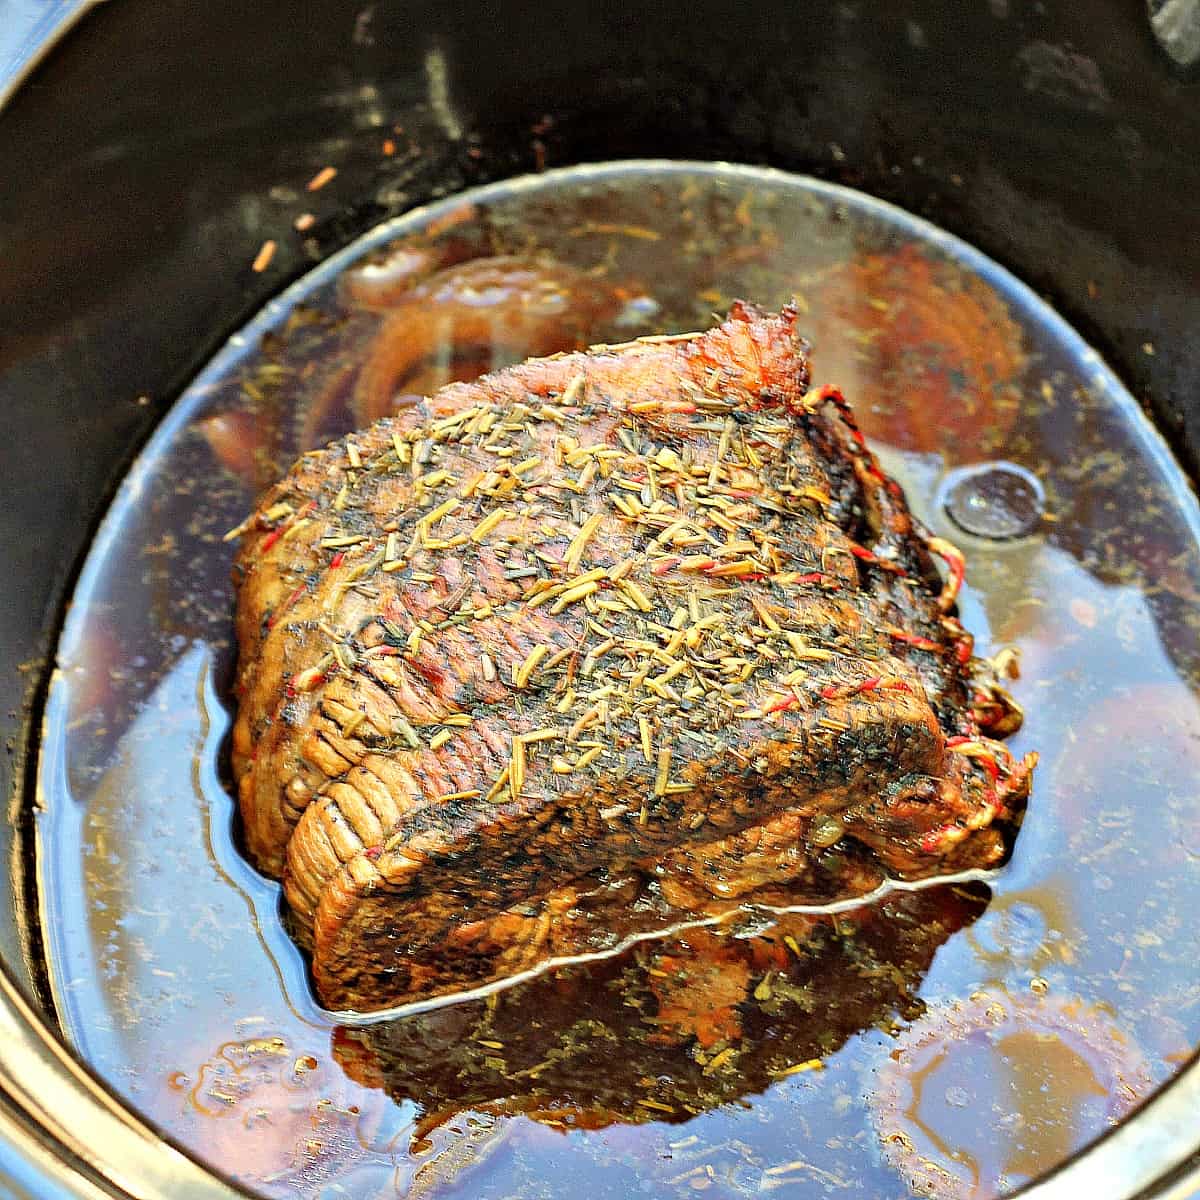 Brisket ready to eat, in pot.